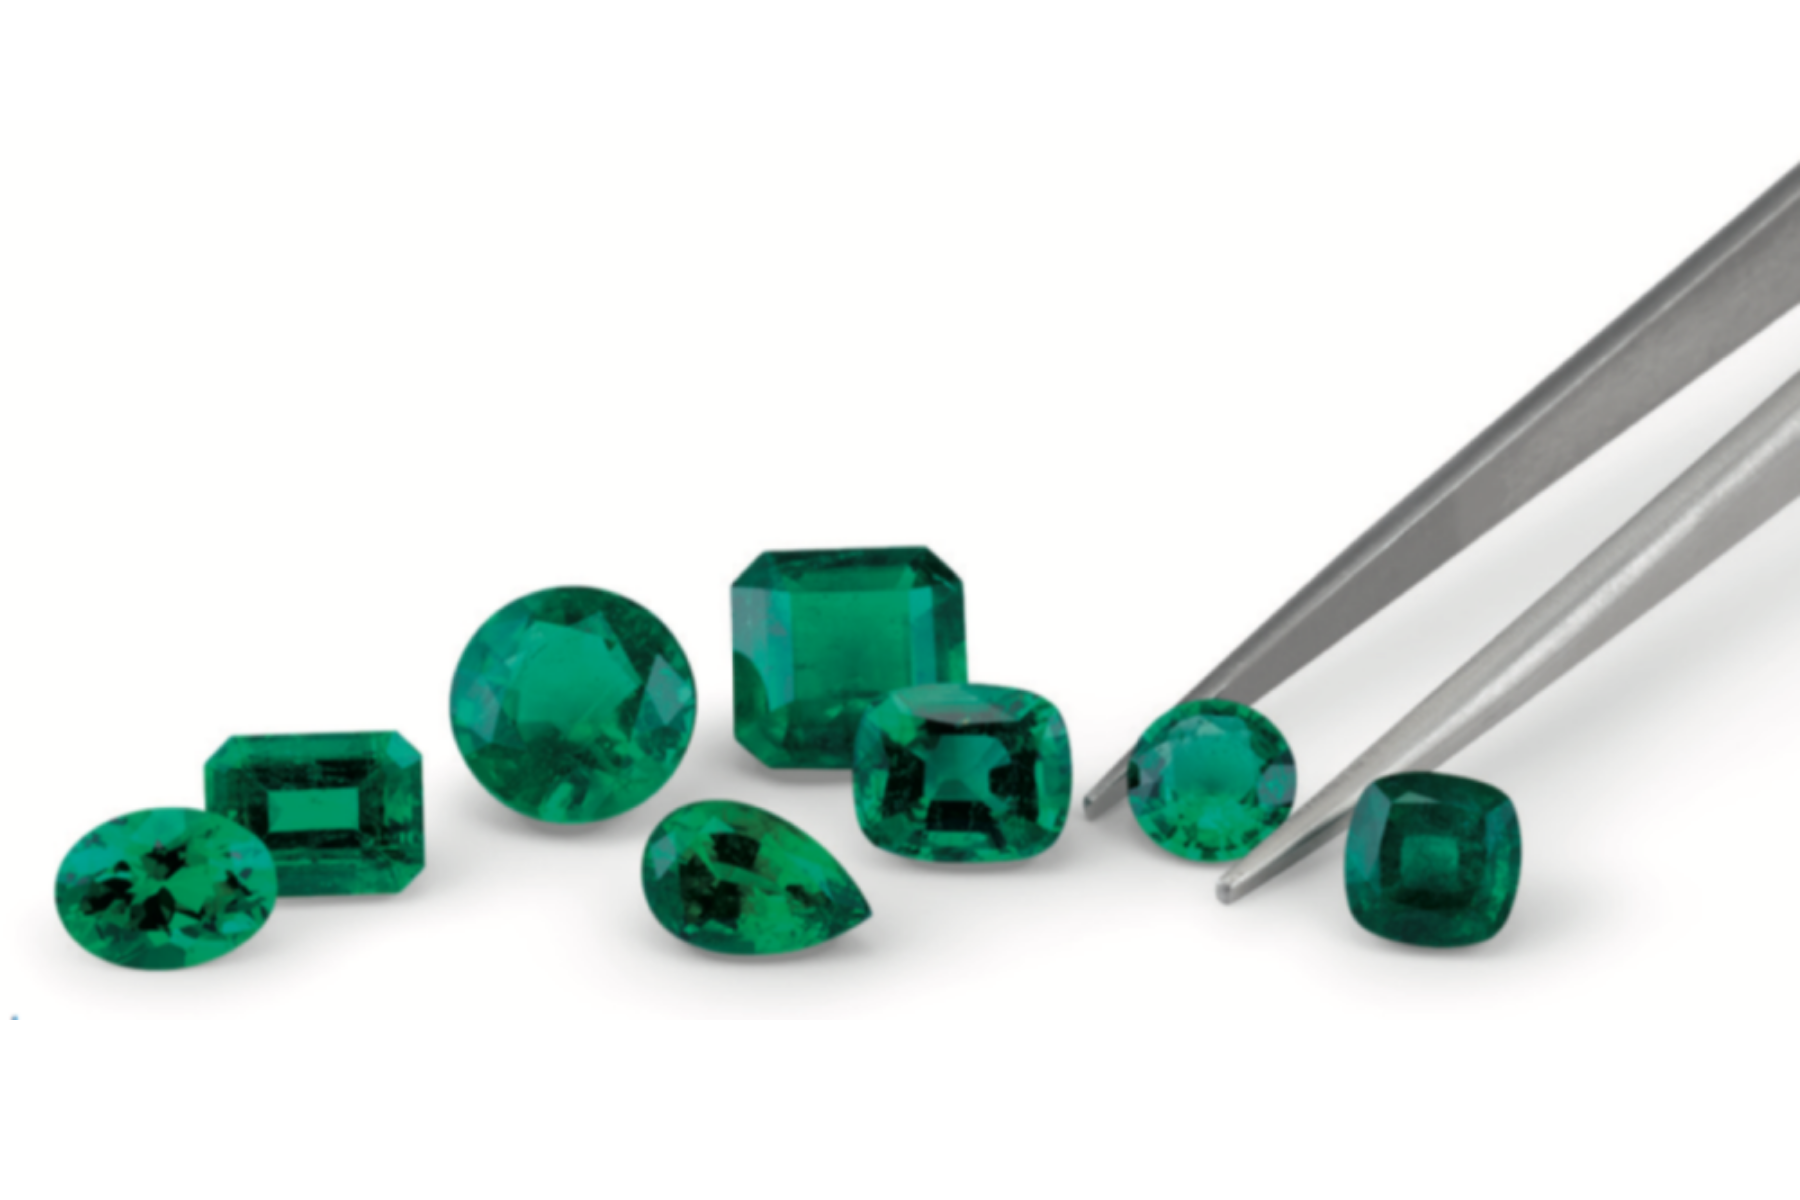 A prong selects one of the eight different green gemstone shapes and sizes